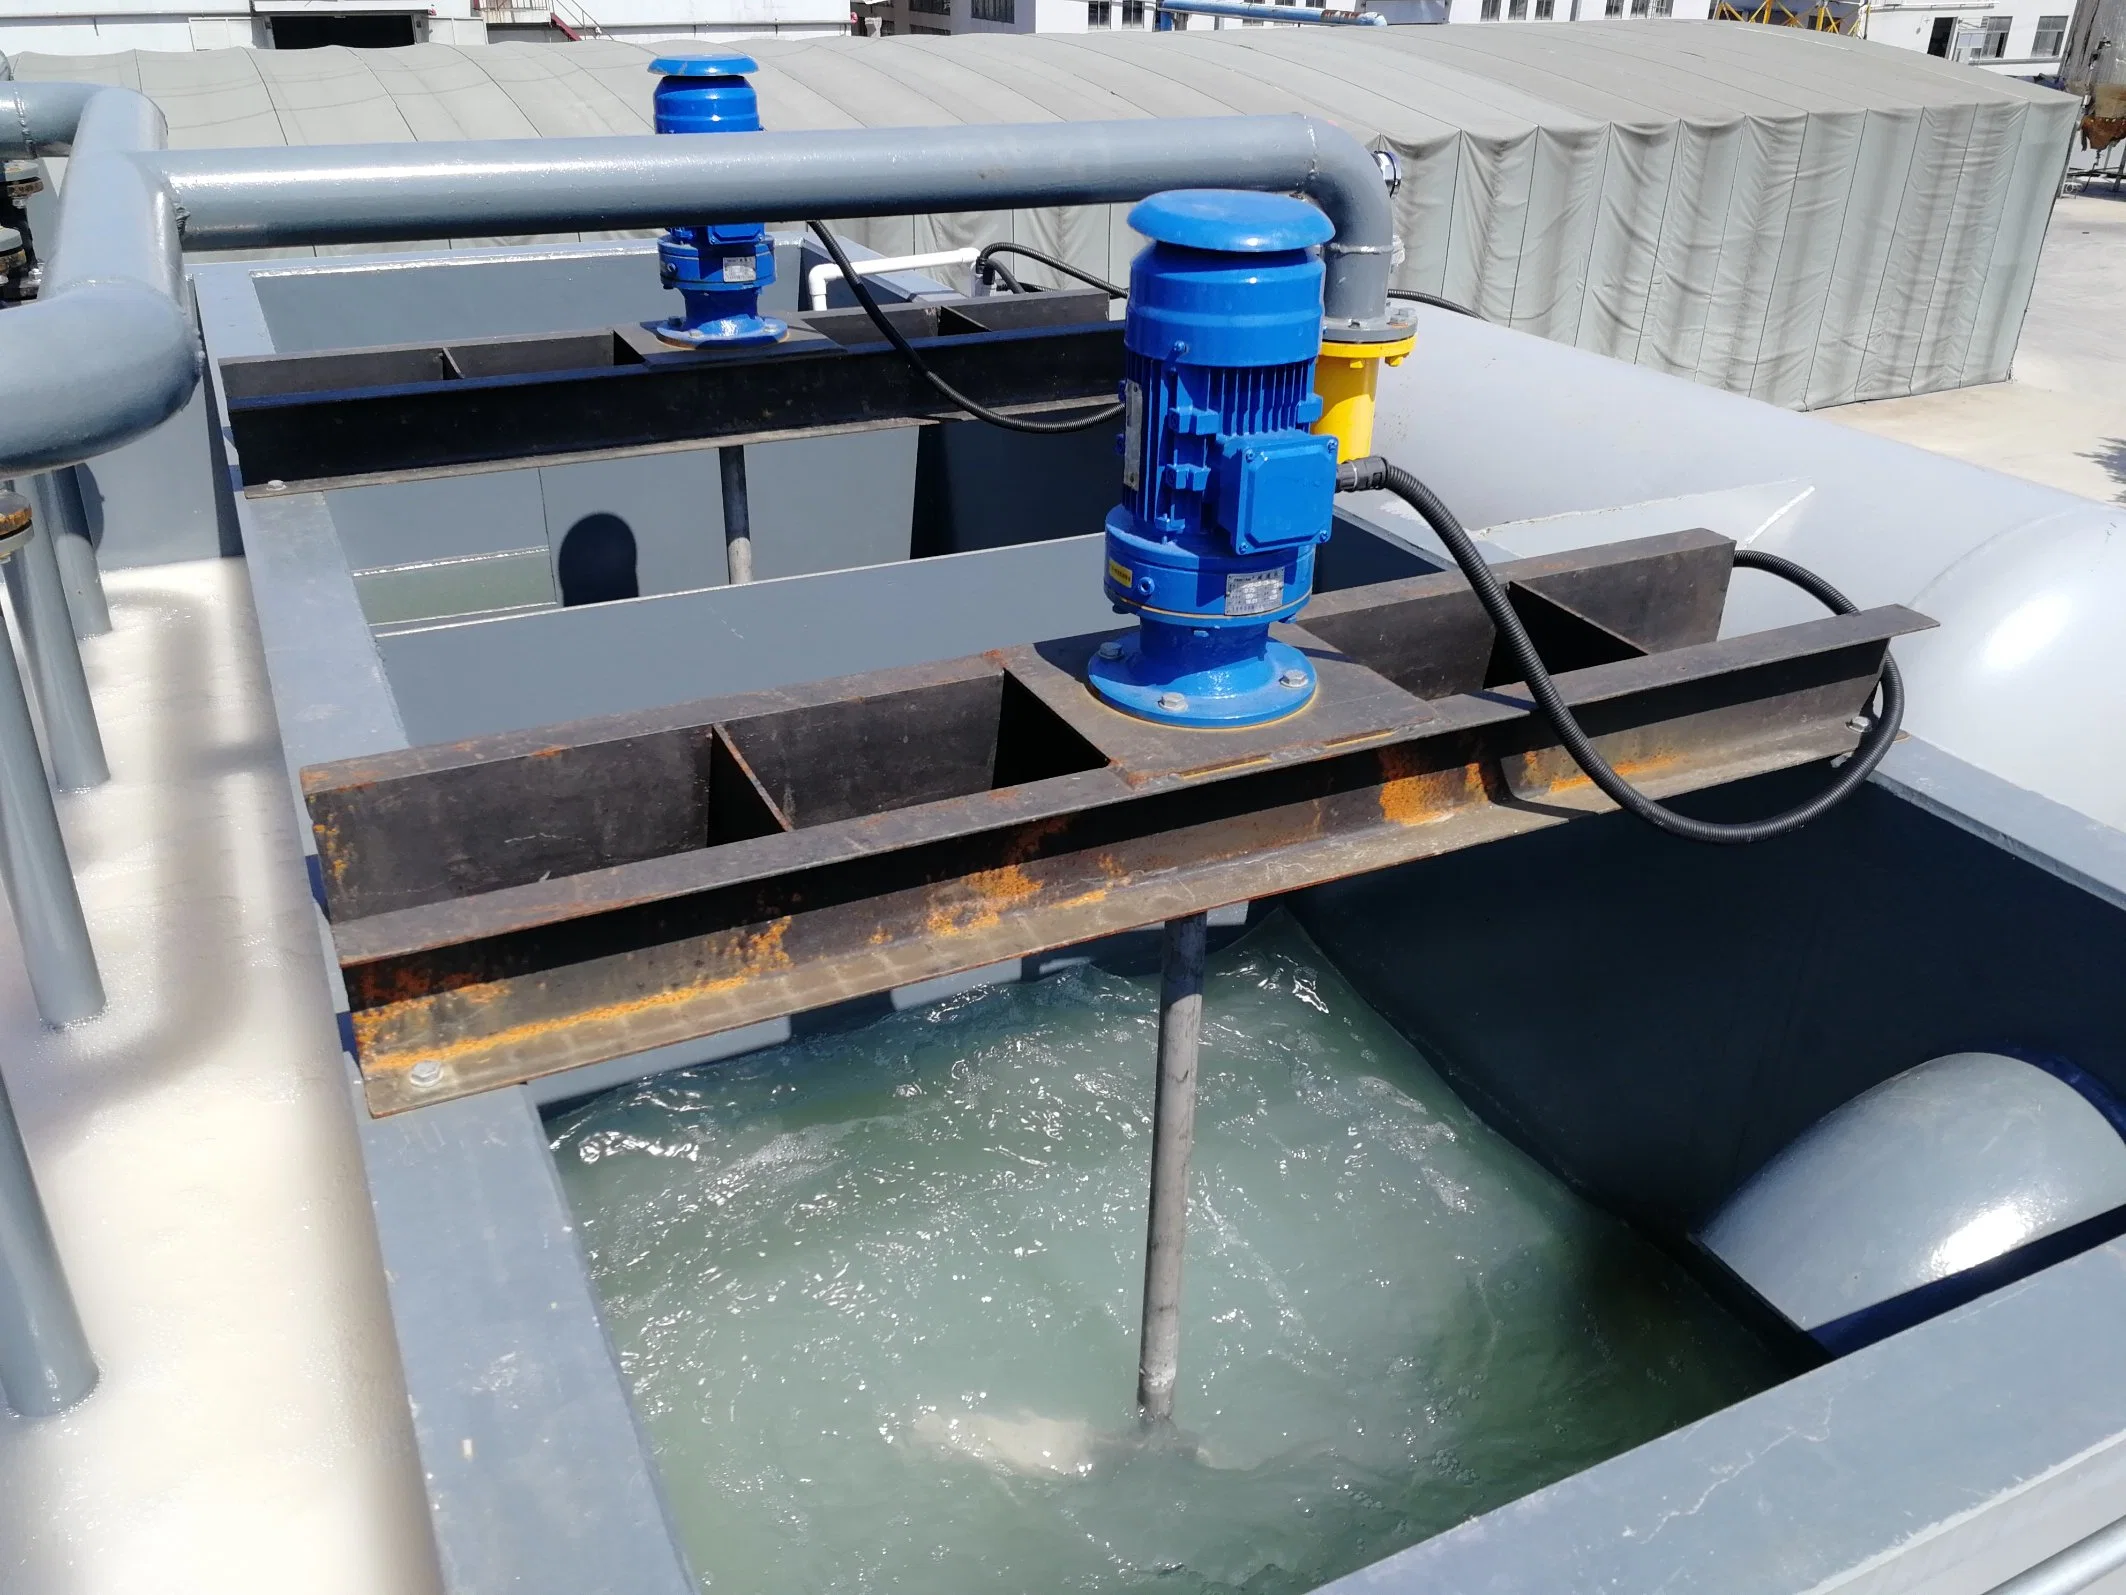 Daf System Dissolved Air Flotation Units Water Treatment Equipment for Sewage Treatment